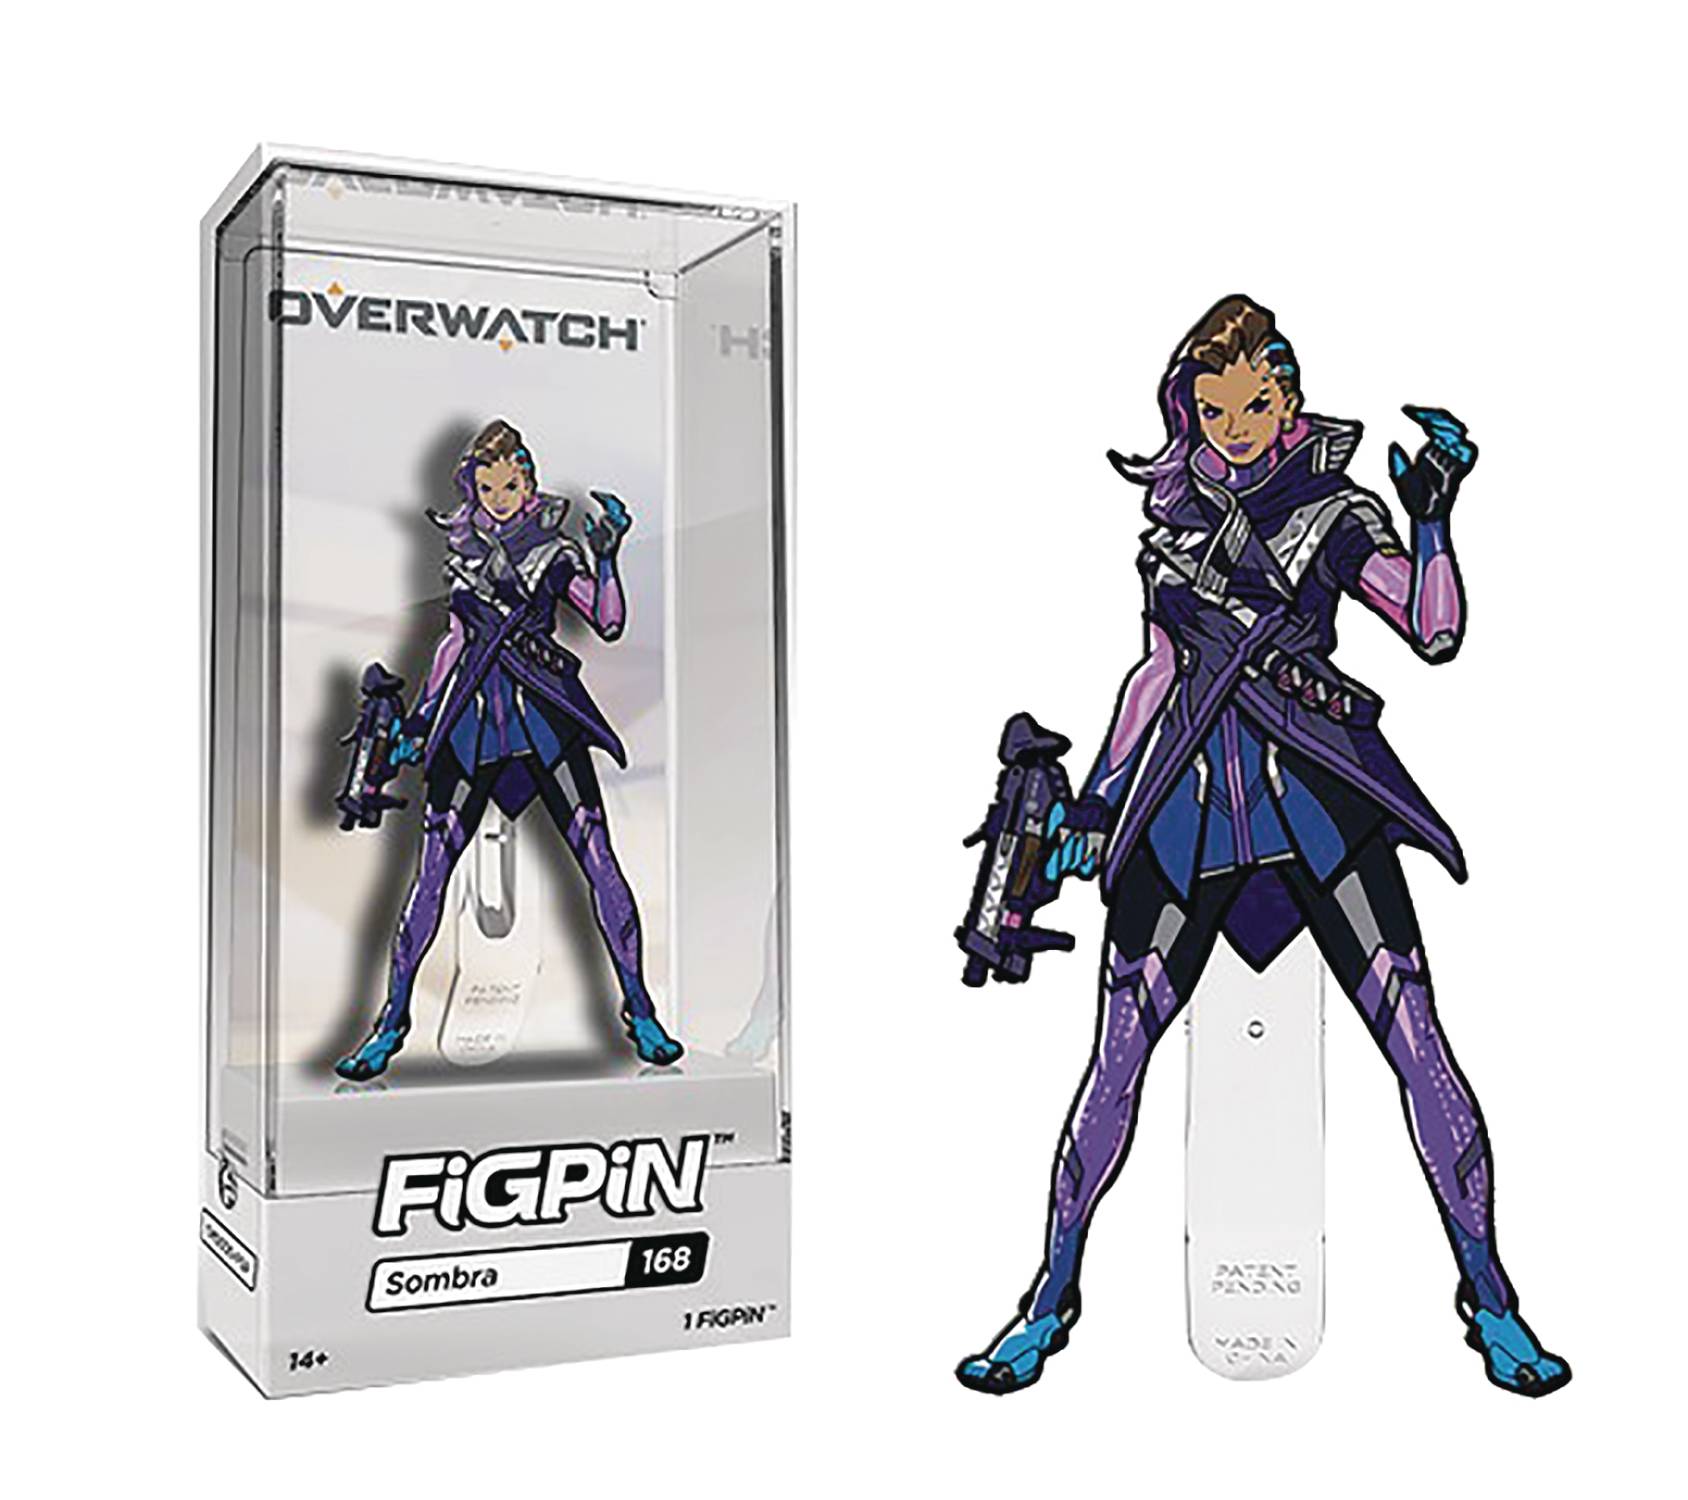 FIGPIN OVERWATCH SOMBRA PIN